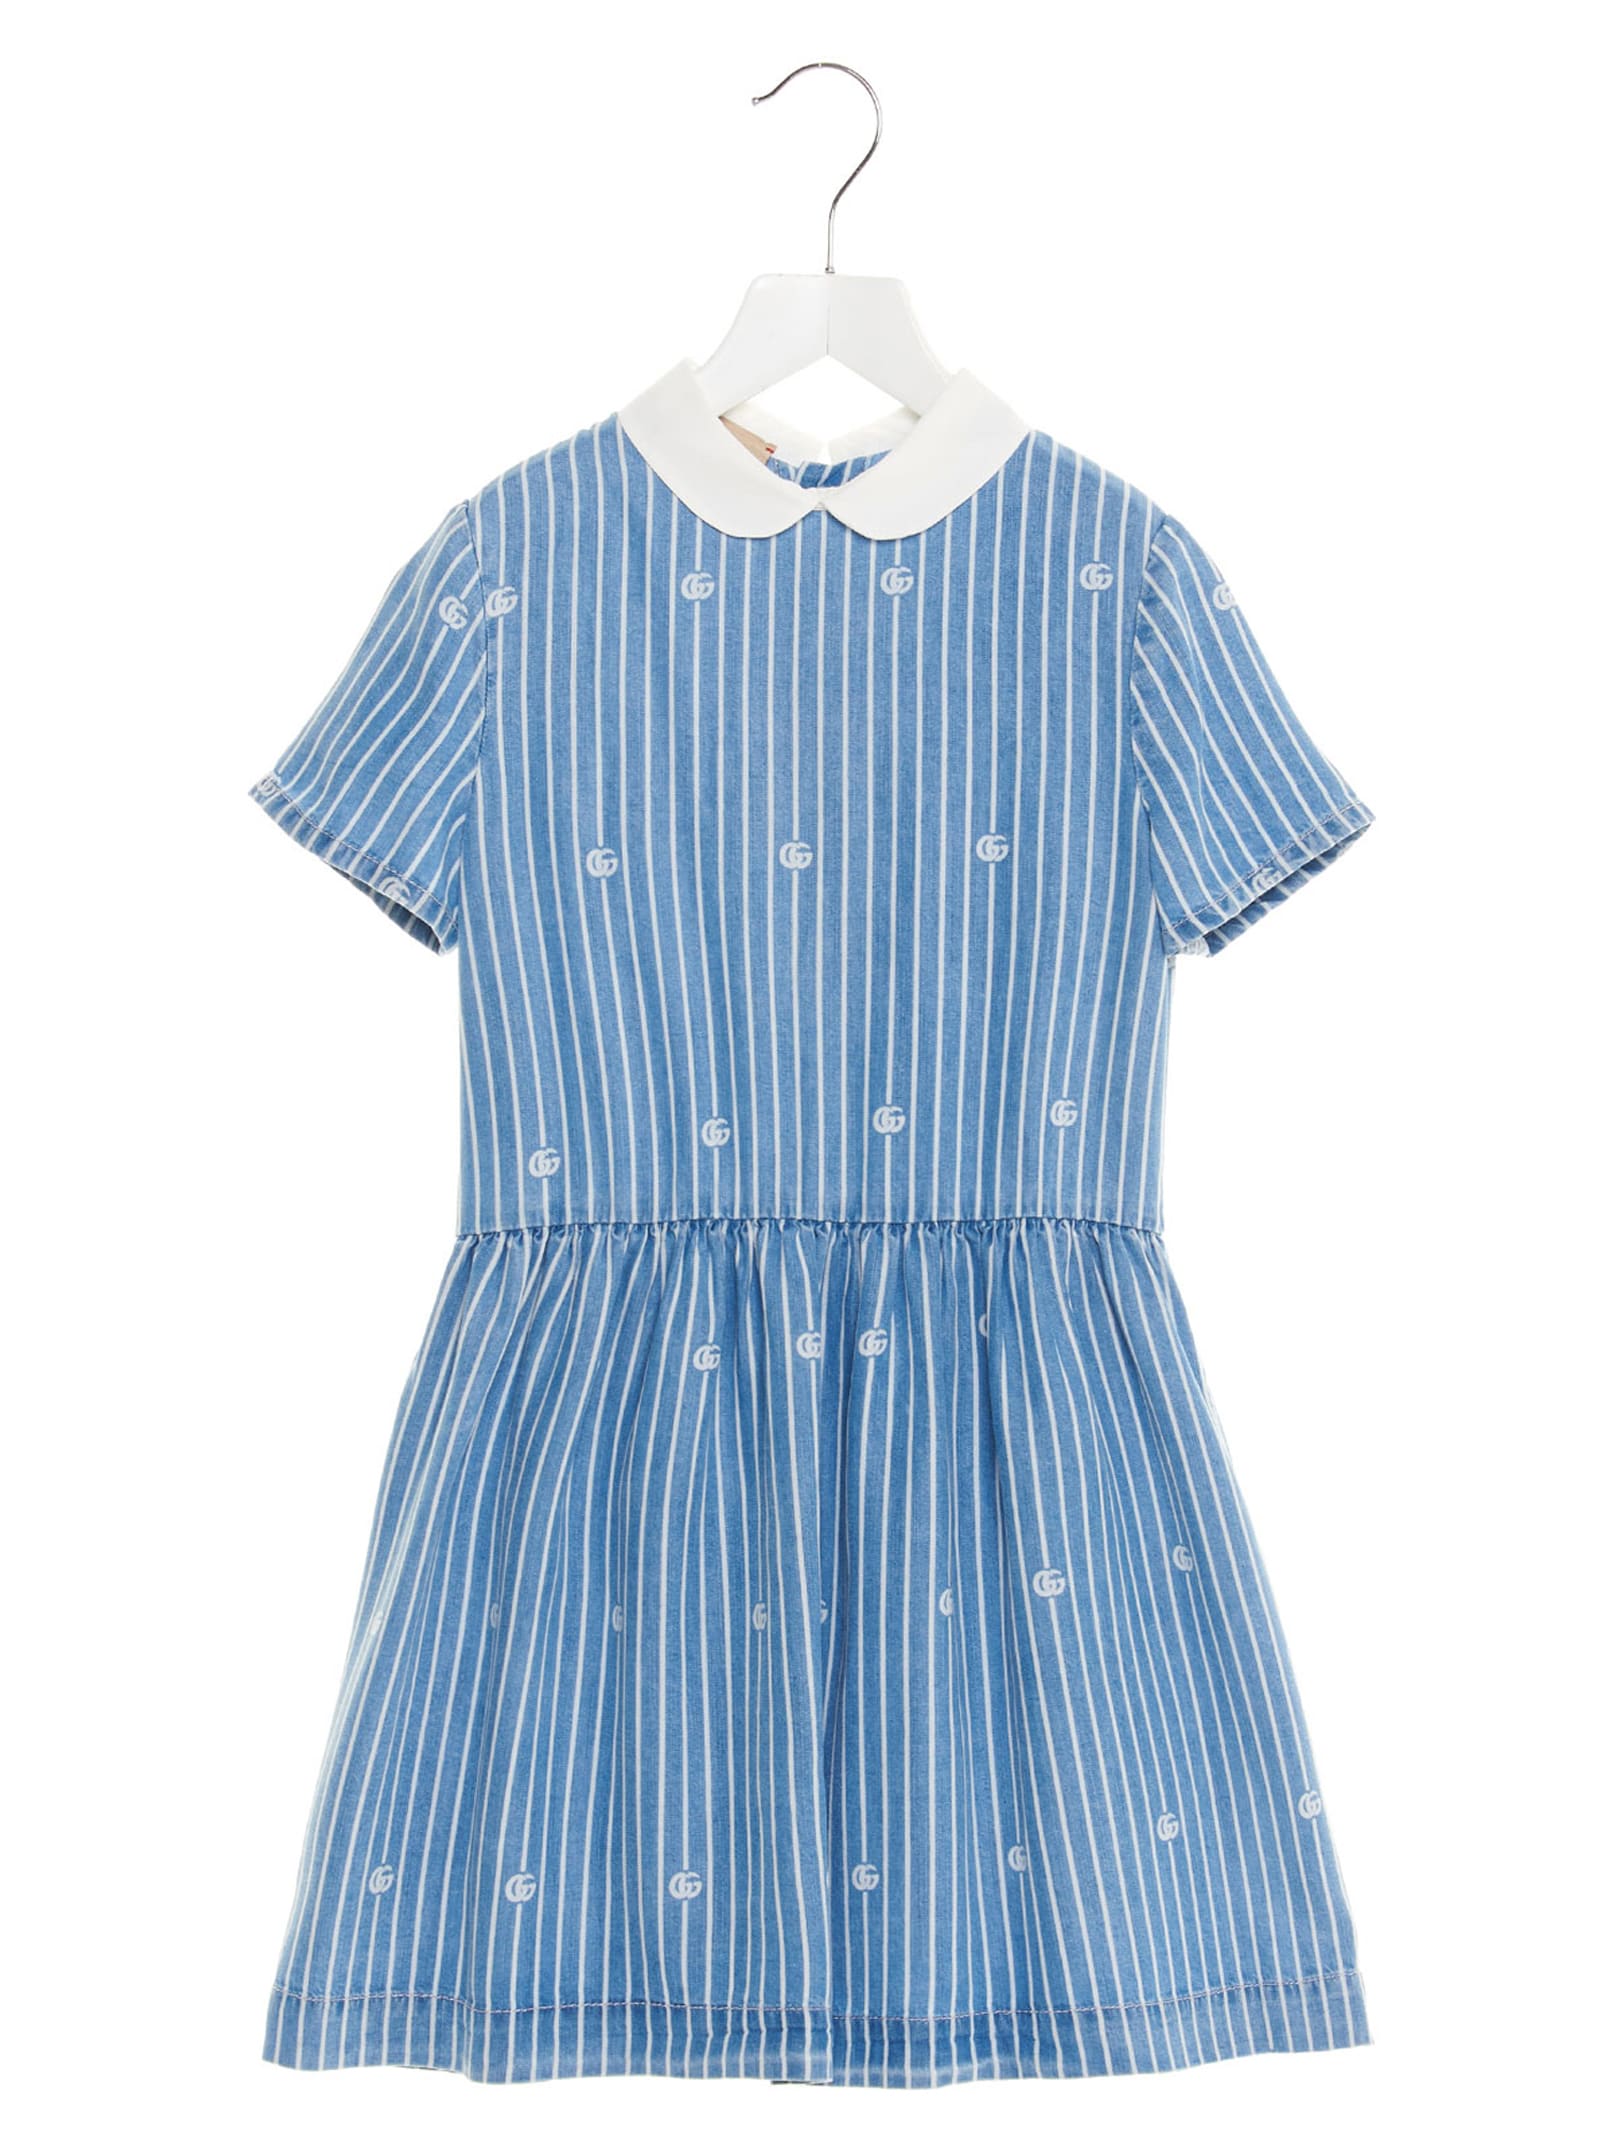 Gucci Kids' Striped Logo Dress In White And Blue In Light Blue